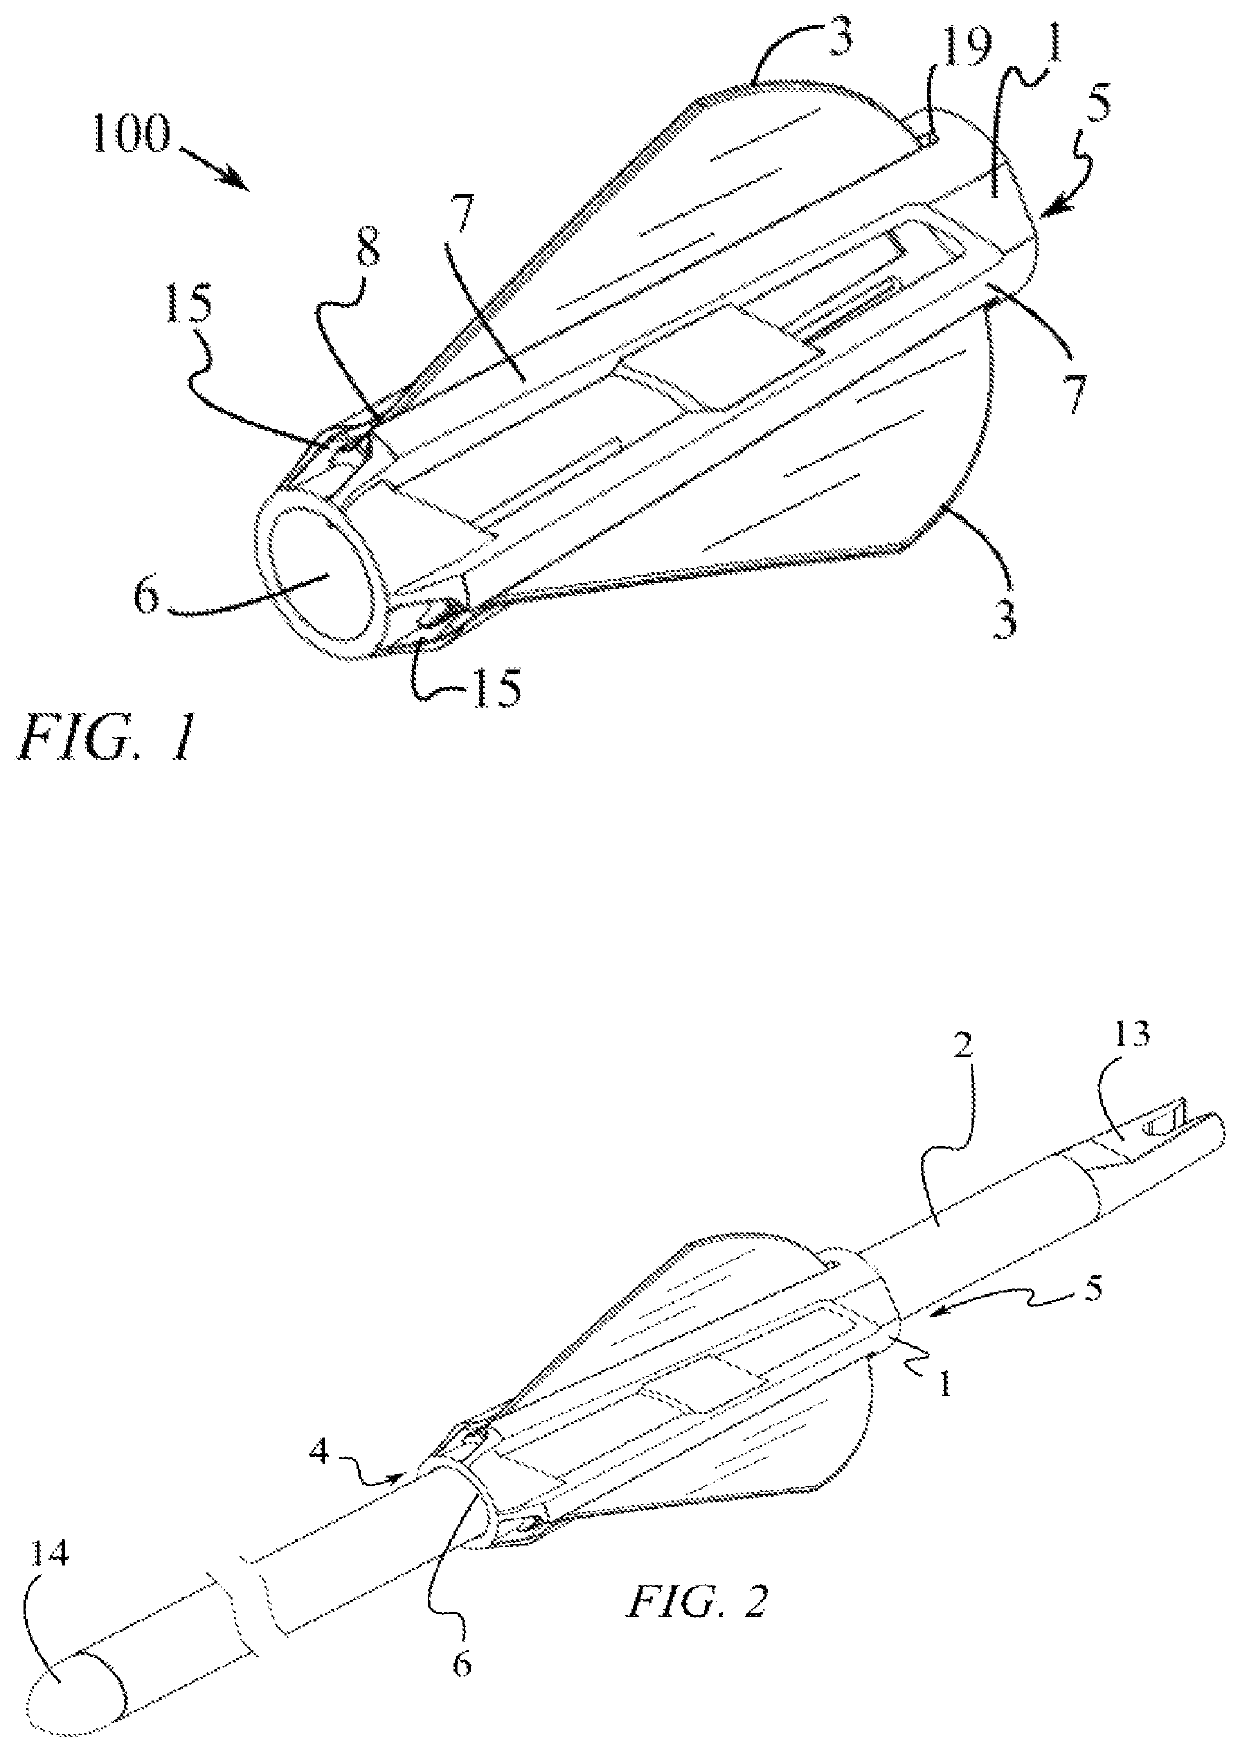 Arrow fletching apparatus with tapered body